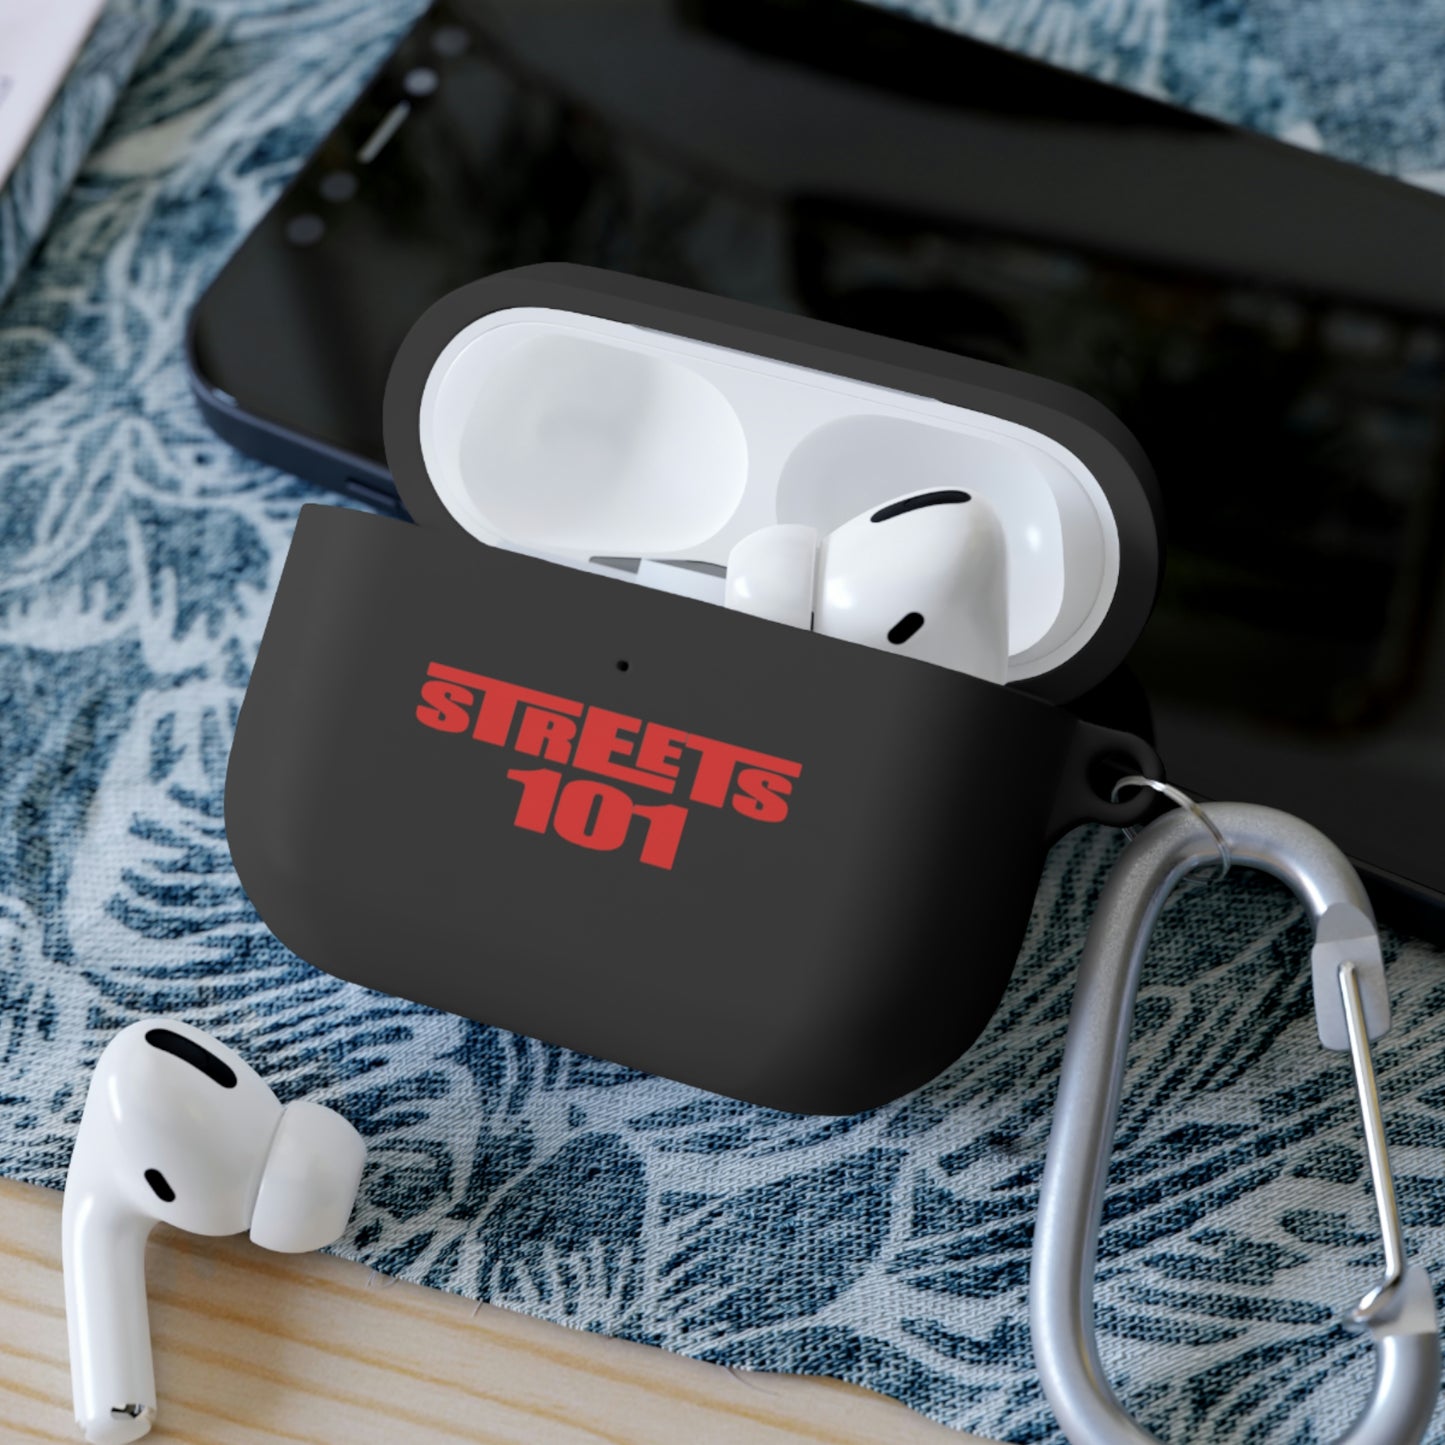 Official Streets 101 AirPods Pro Case Cover